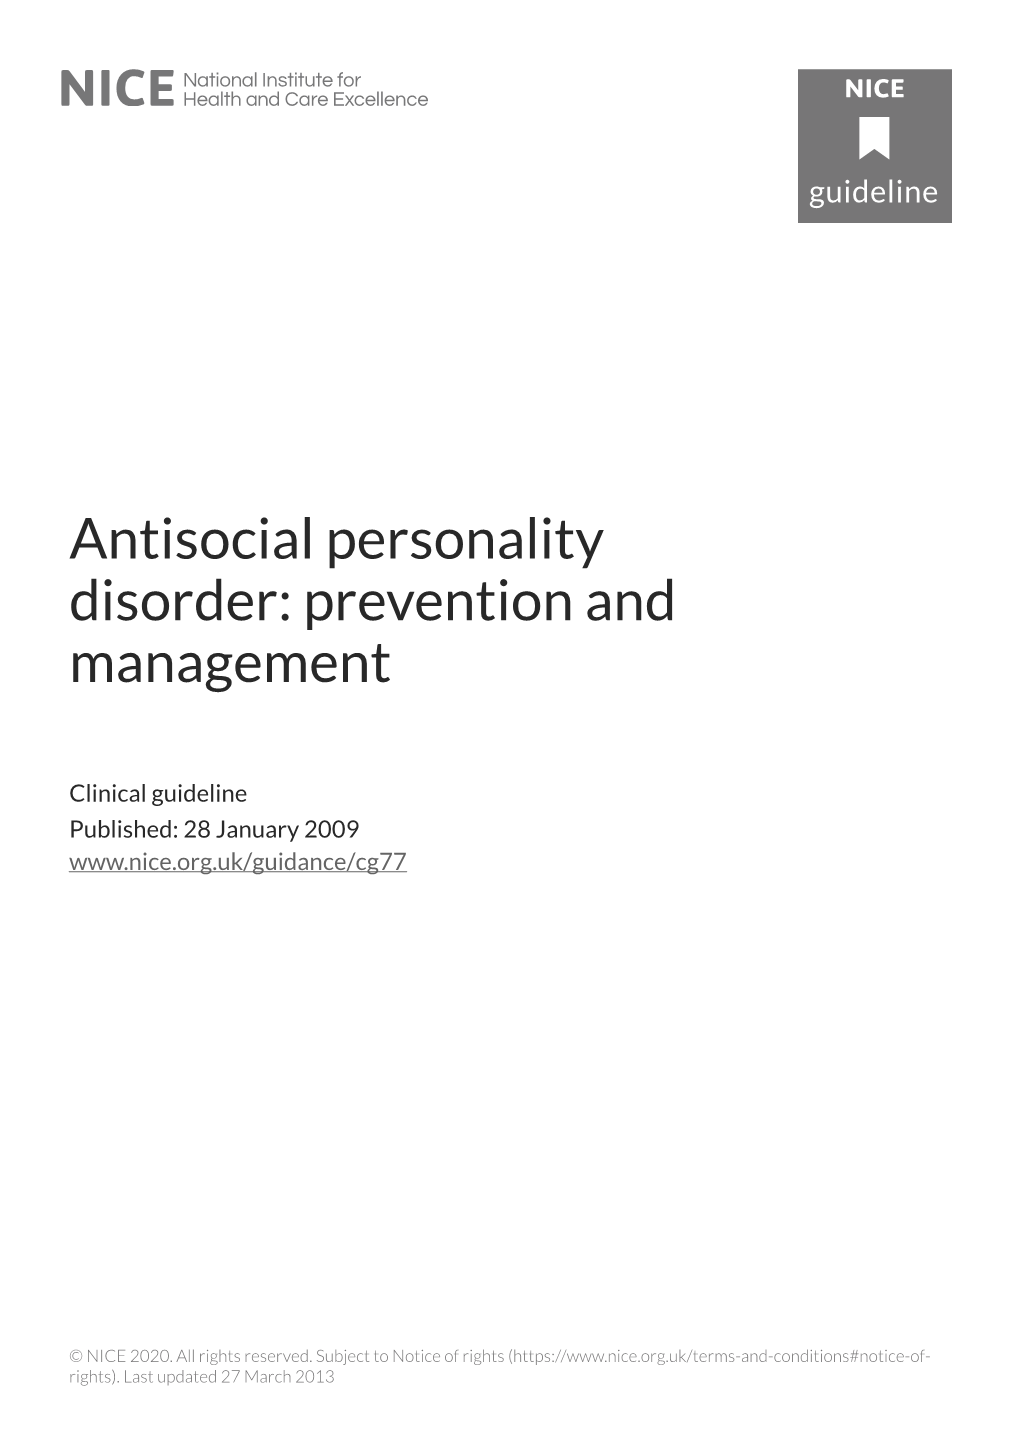 Antisocial Personality Disorder: Prevention and Management